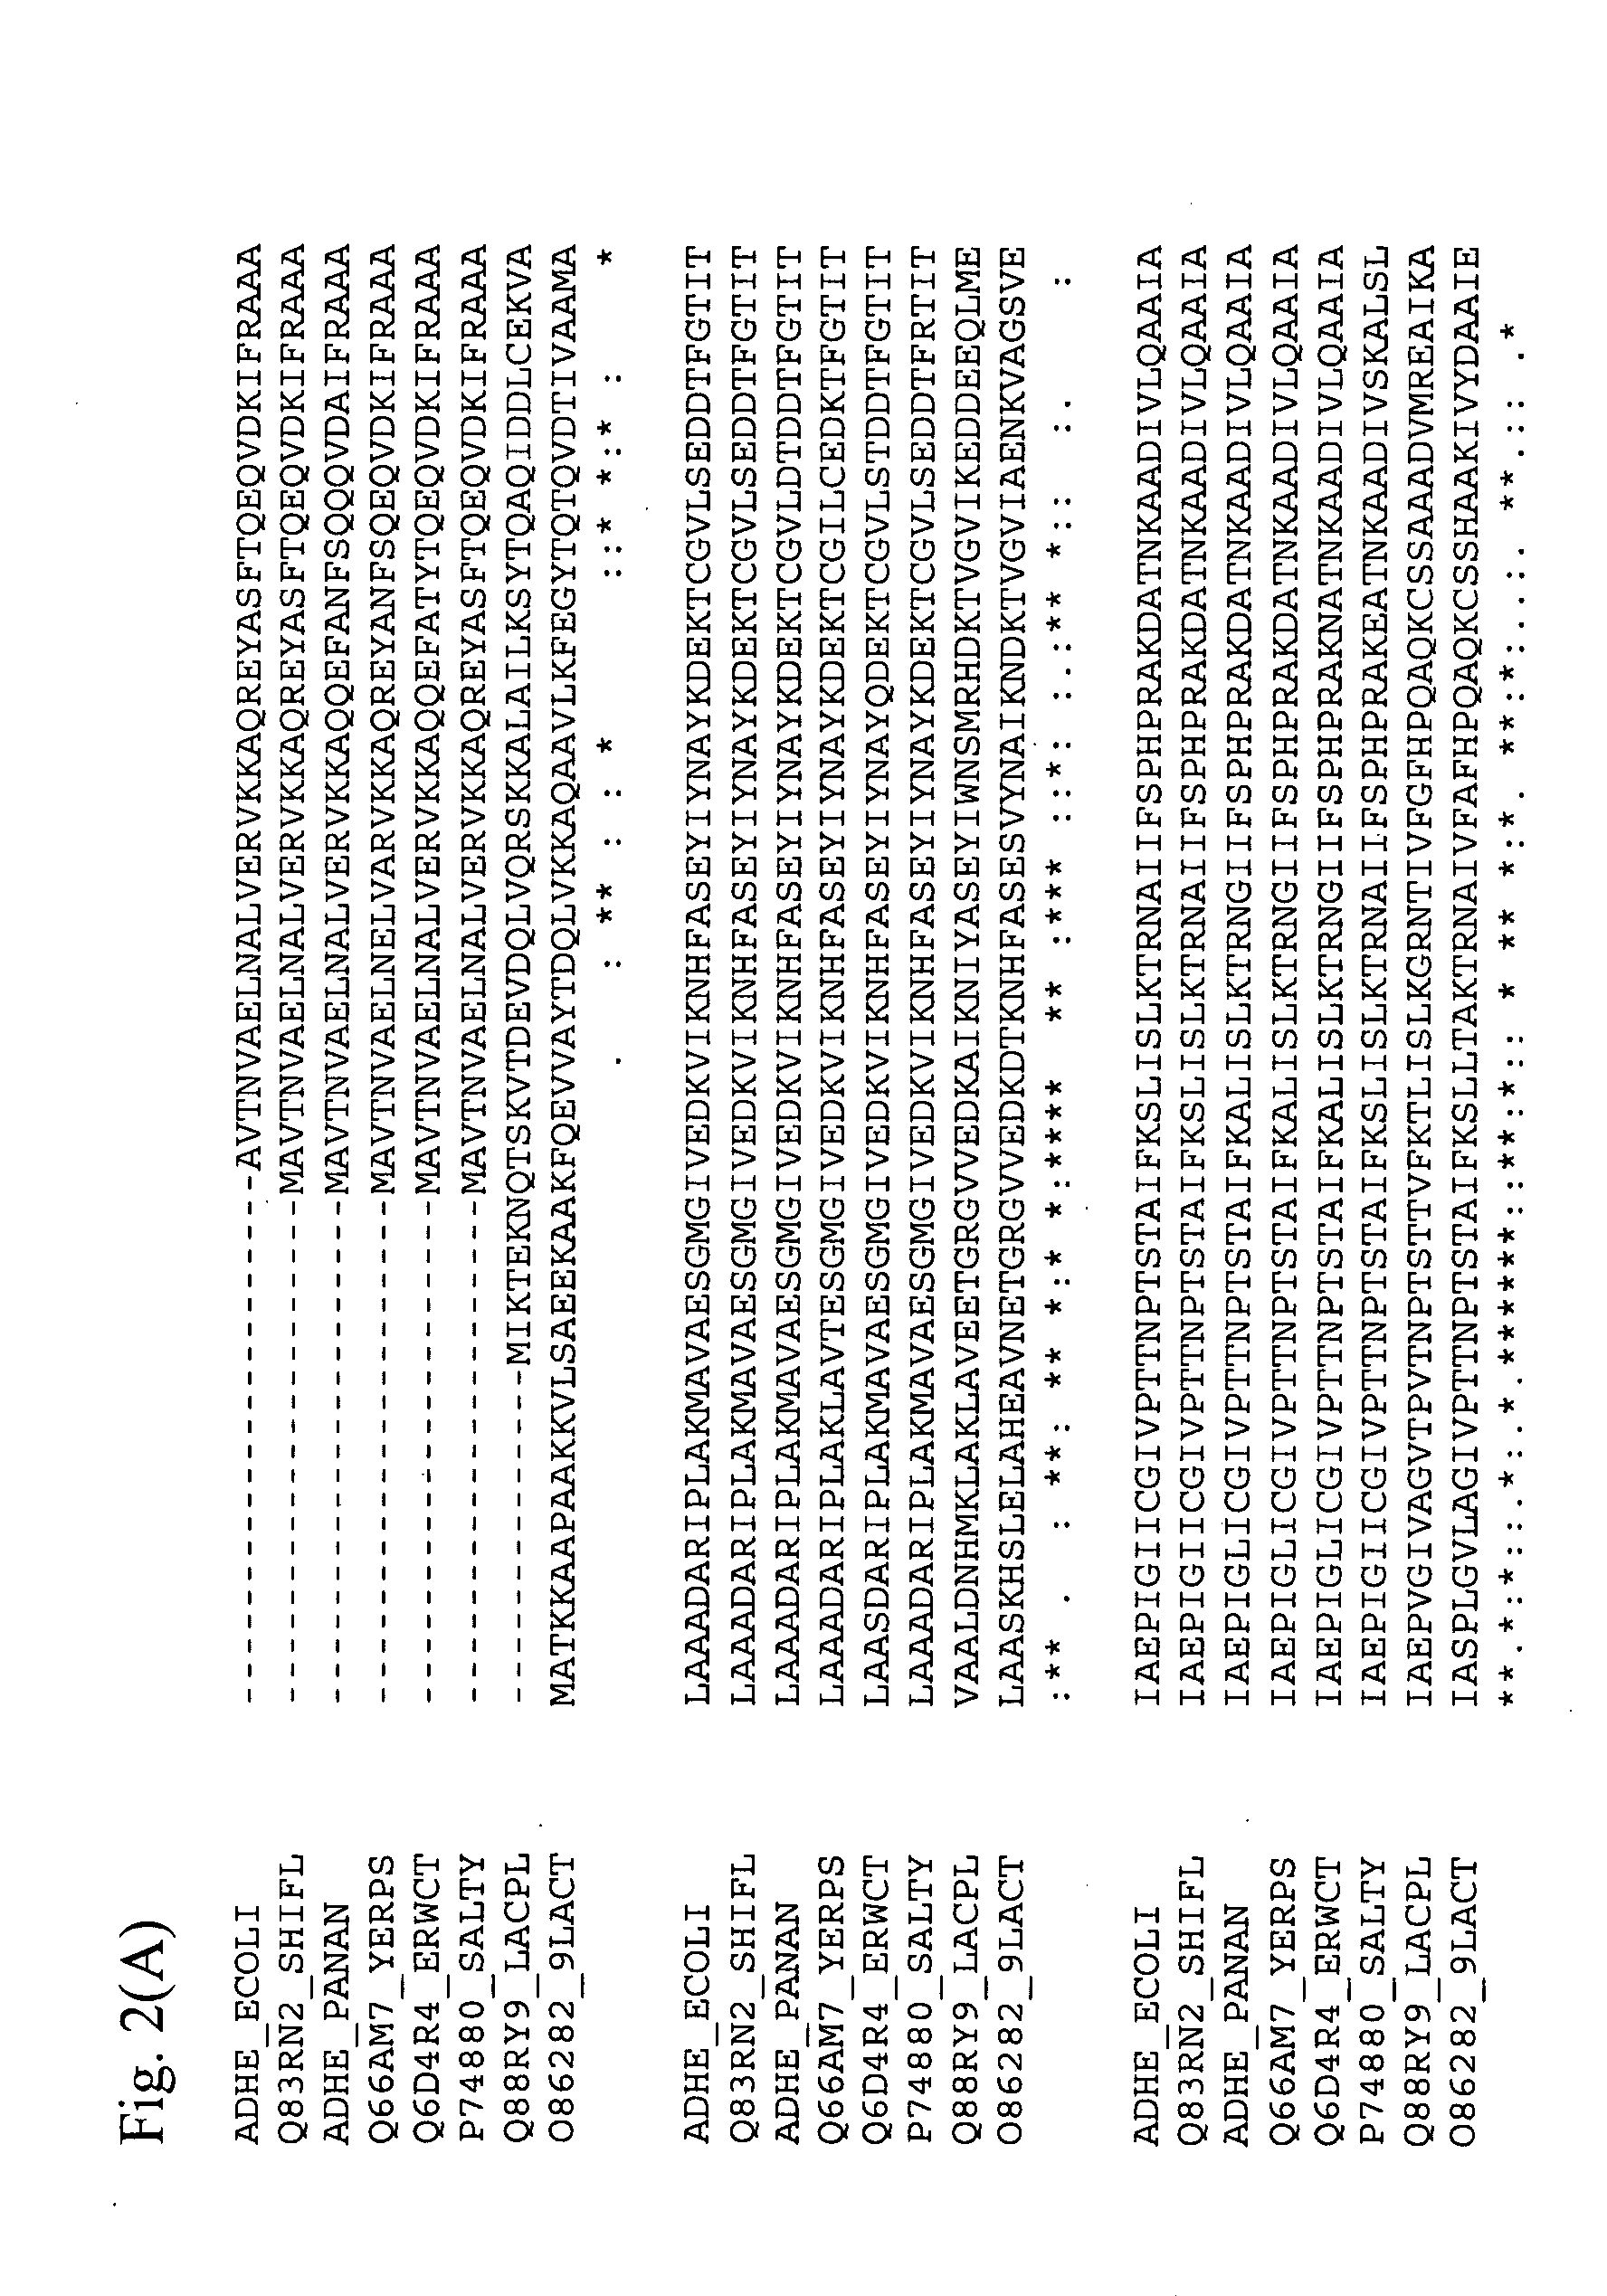 Method for producing an l-amino acid using a bacterium of the enterobacteriaceae family